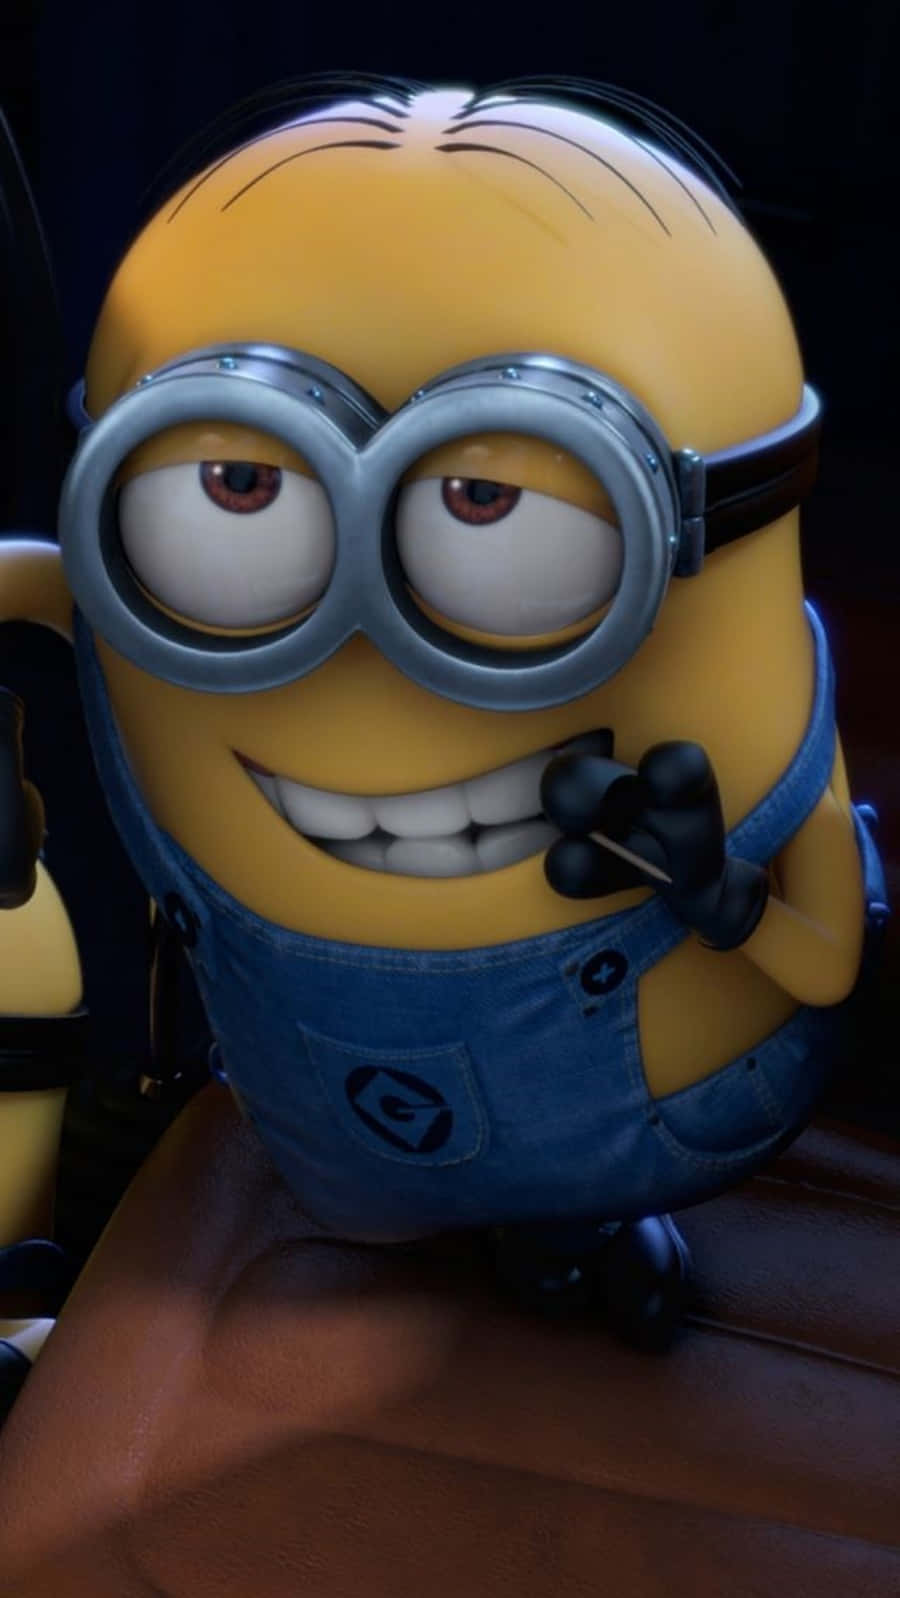 Cool Despicable Me Minion Iphone Wallpaper